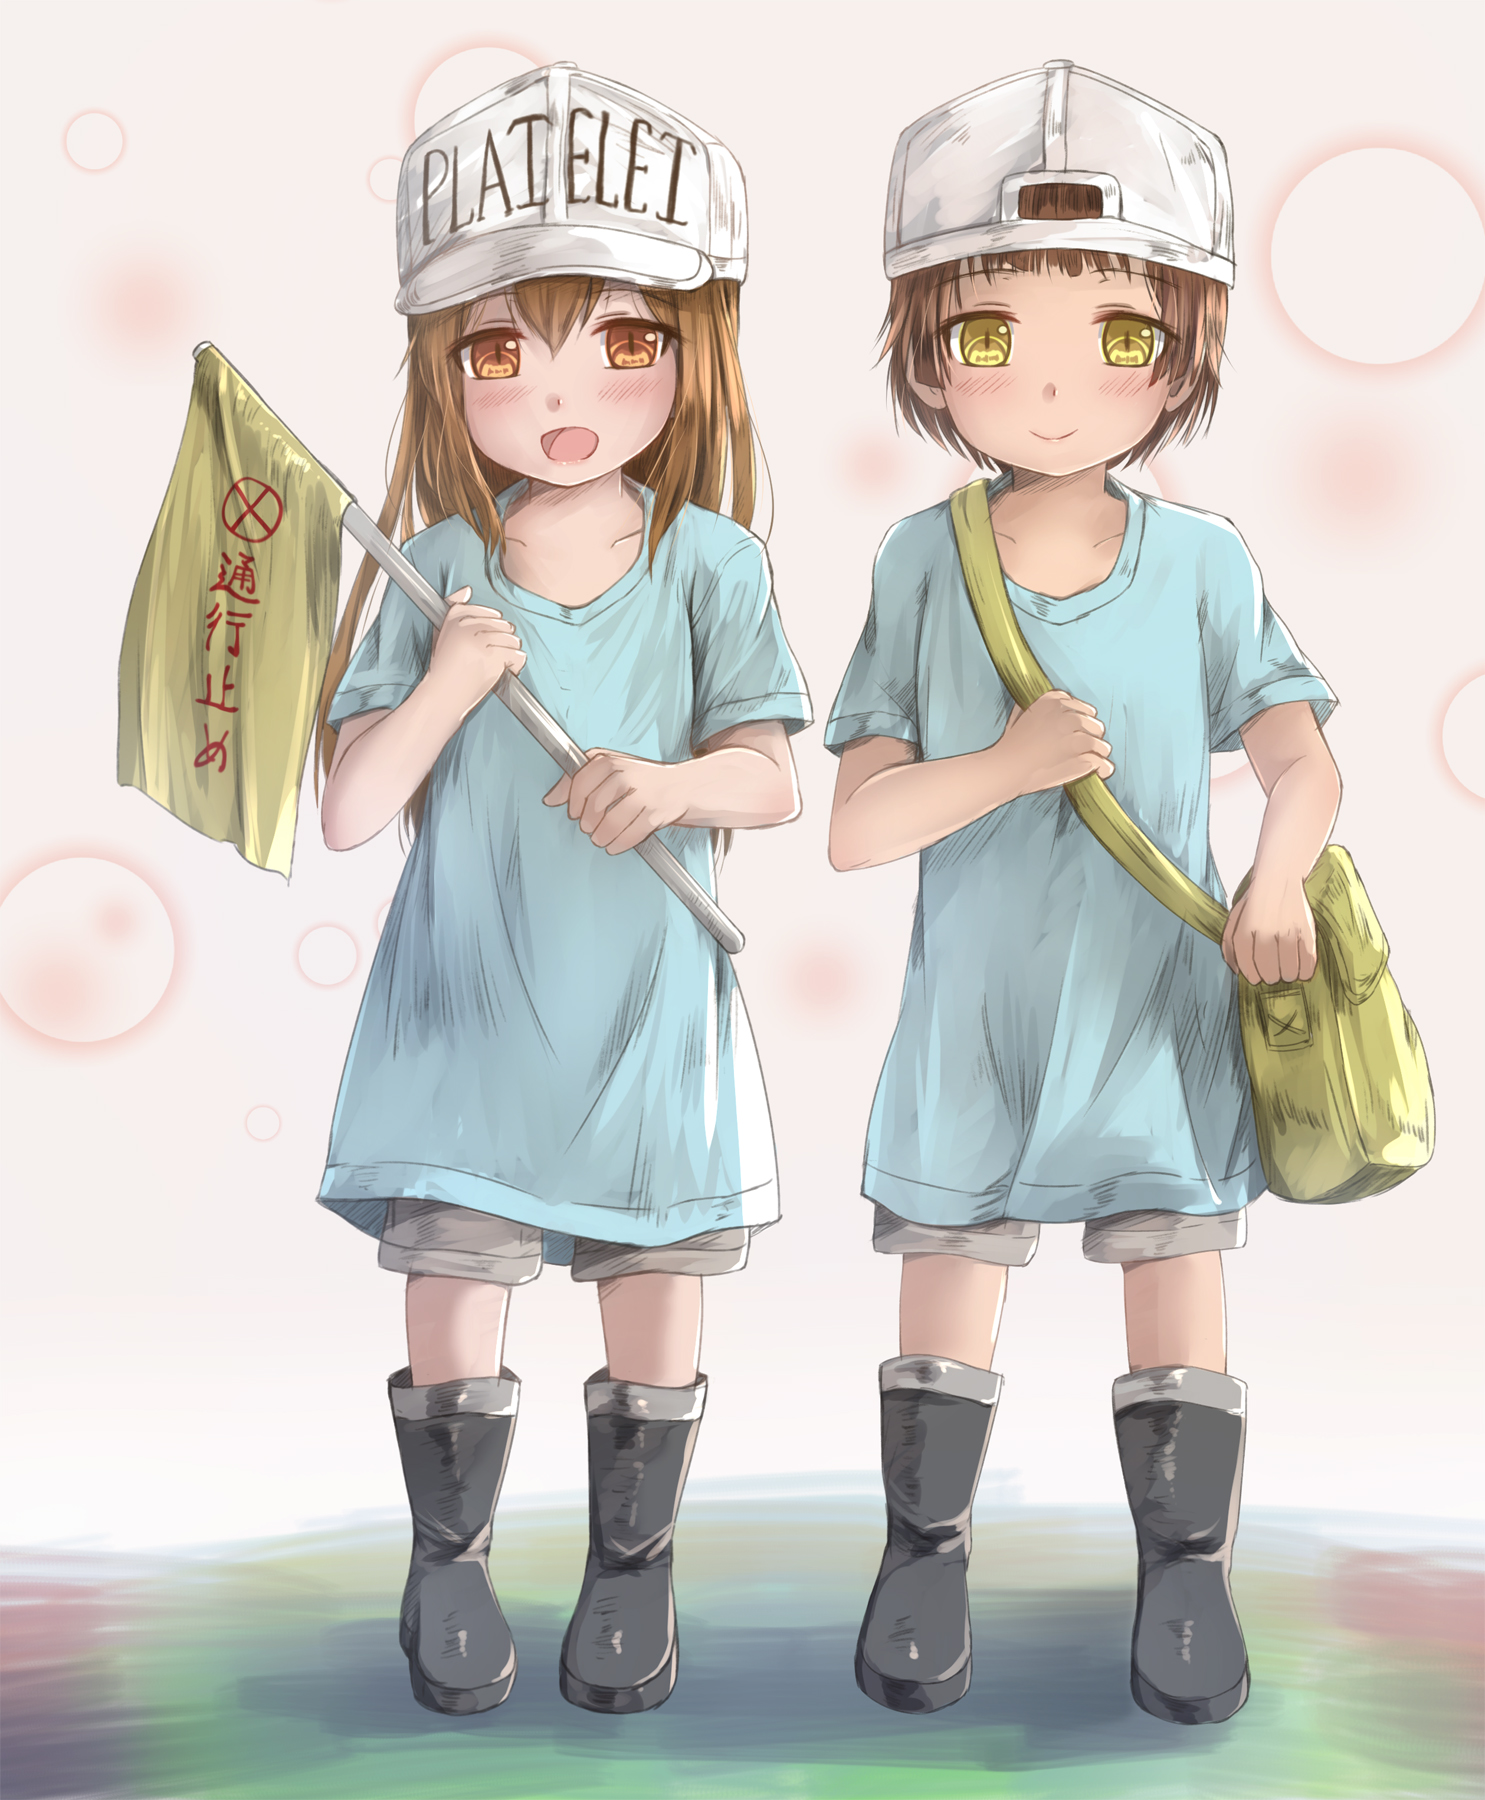 Platelets at work~